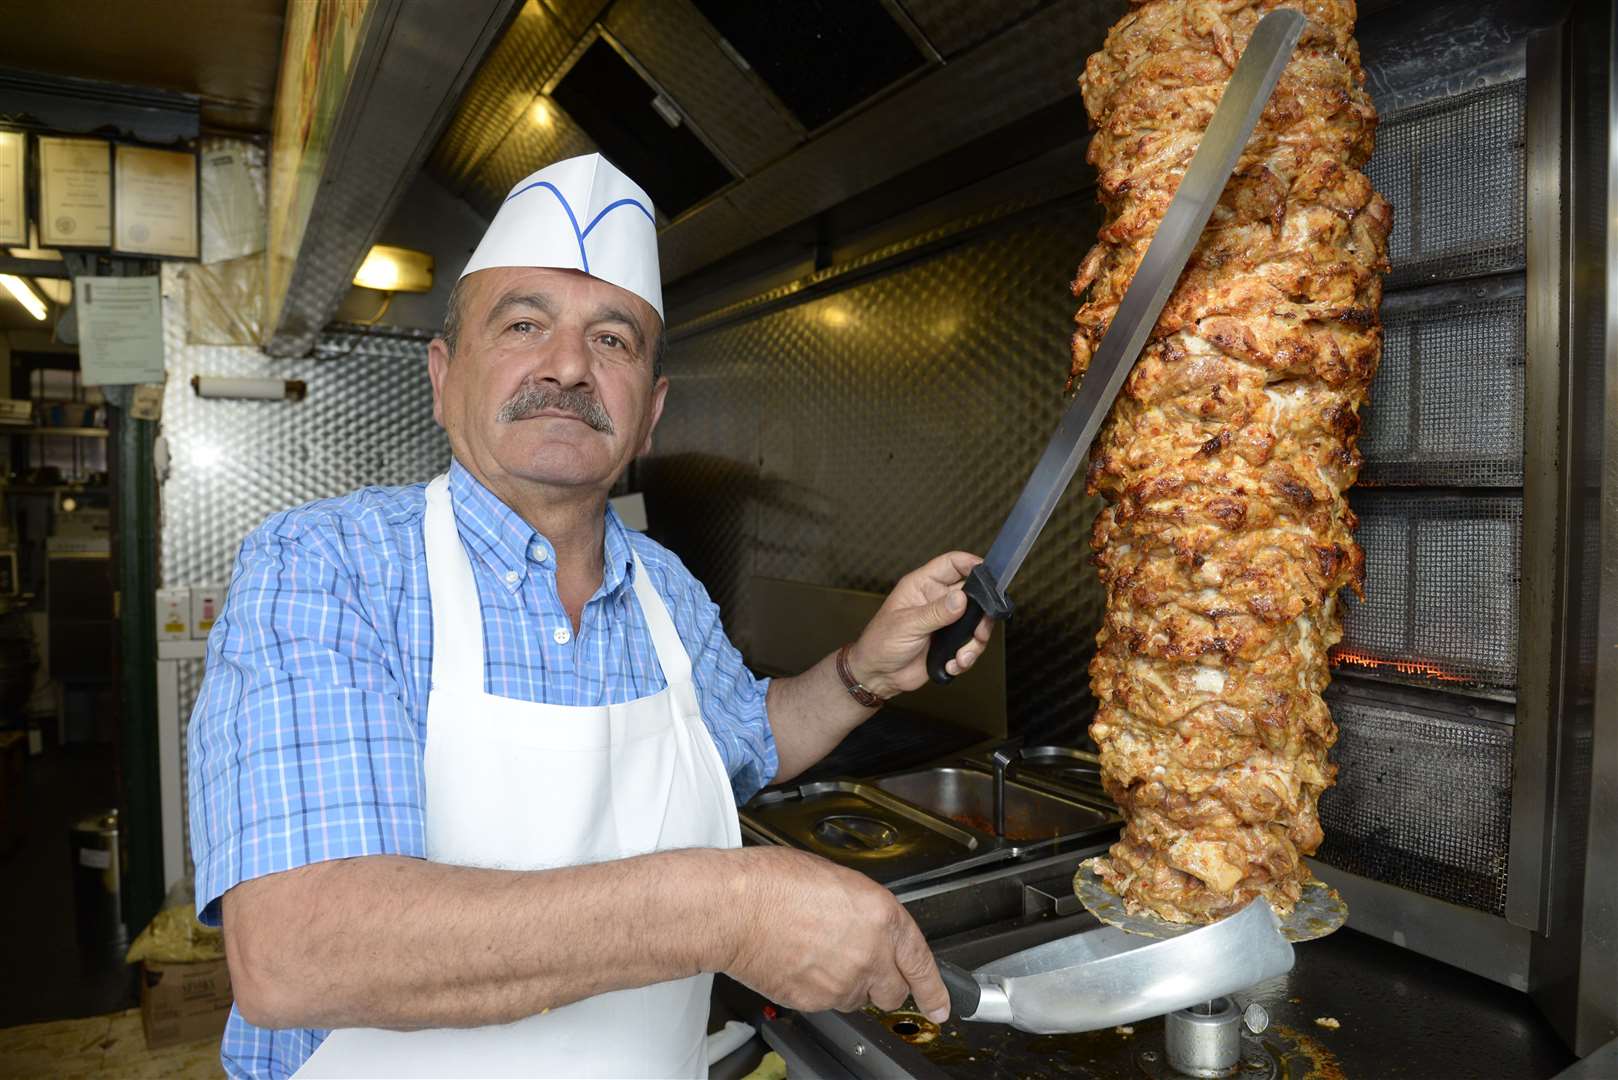 Mehmet Ozel launched the Faversham Kebab House in Preston Street in 1986. Picture: Chris Davey